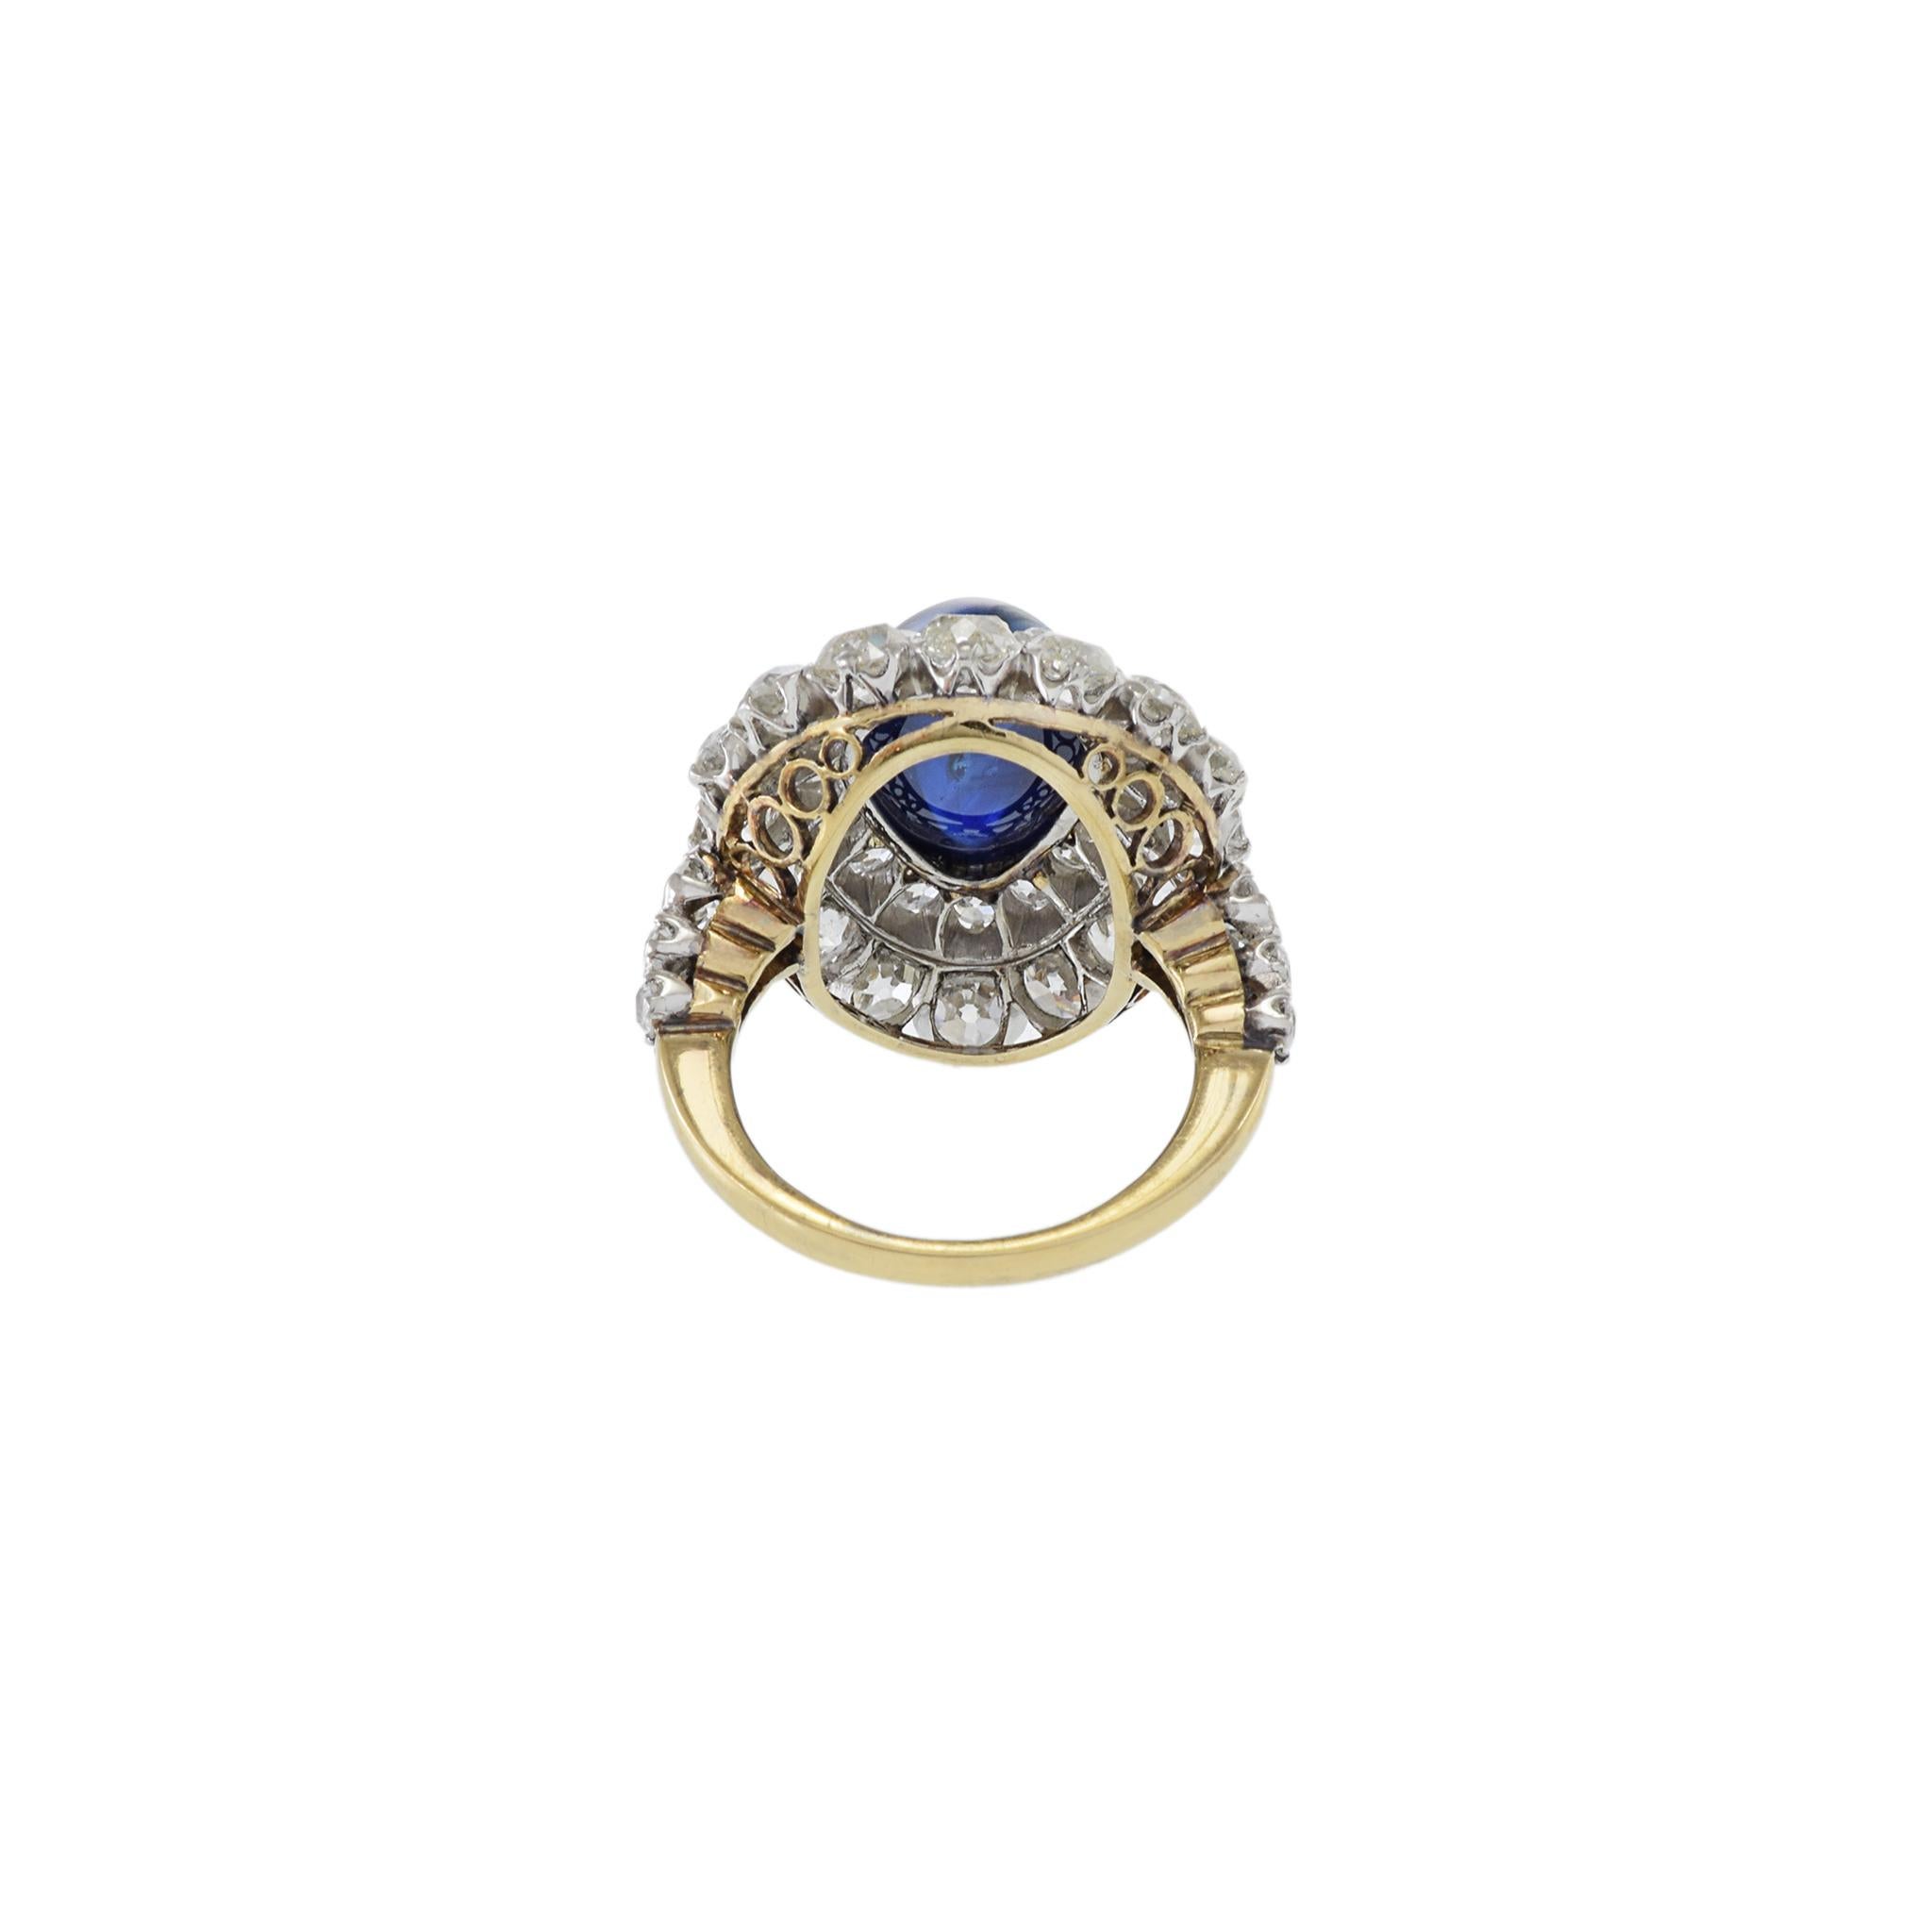 Old Mine Cut Victorian Era 18KT Yellow Gold/ Platinum Sapphire And Diamond Ring For Sale